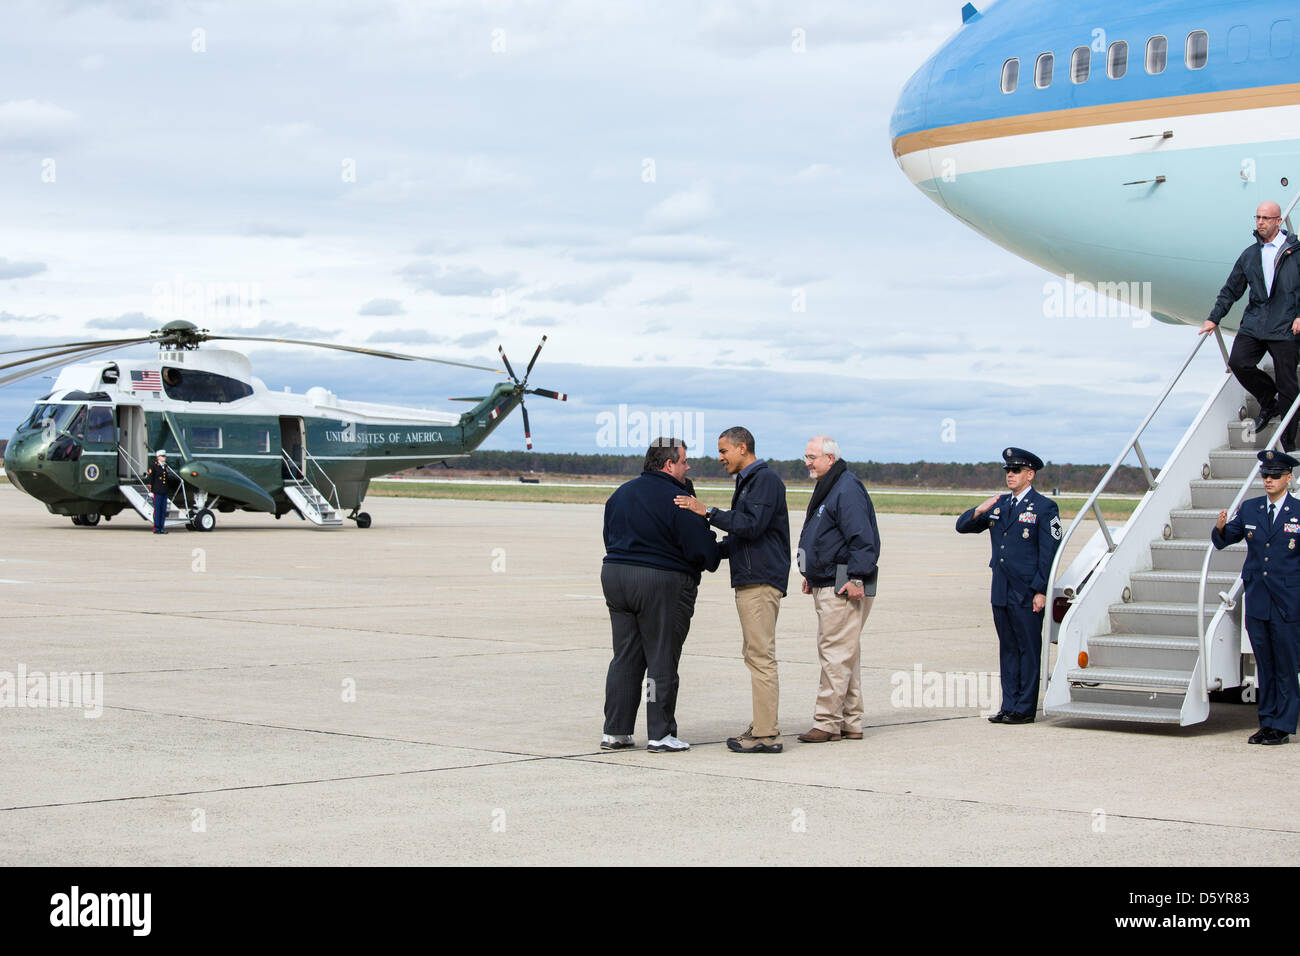 United States President Barack Obama and FEMA Administrator Craig Fugate greet New Jersey Governor Chris Christie on the tarmac of Atlantic City International Airport in Atlantic City, New Jersey, Wednesday, October 31, 2012. .Mandatory Credit: Chuck Kennedy - White House via CNP Stock Photo